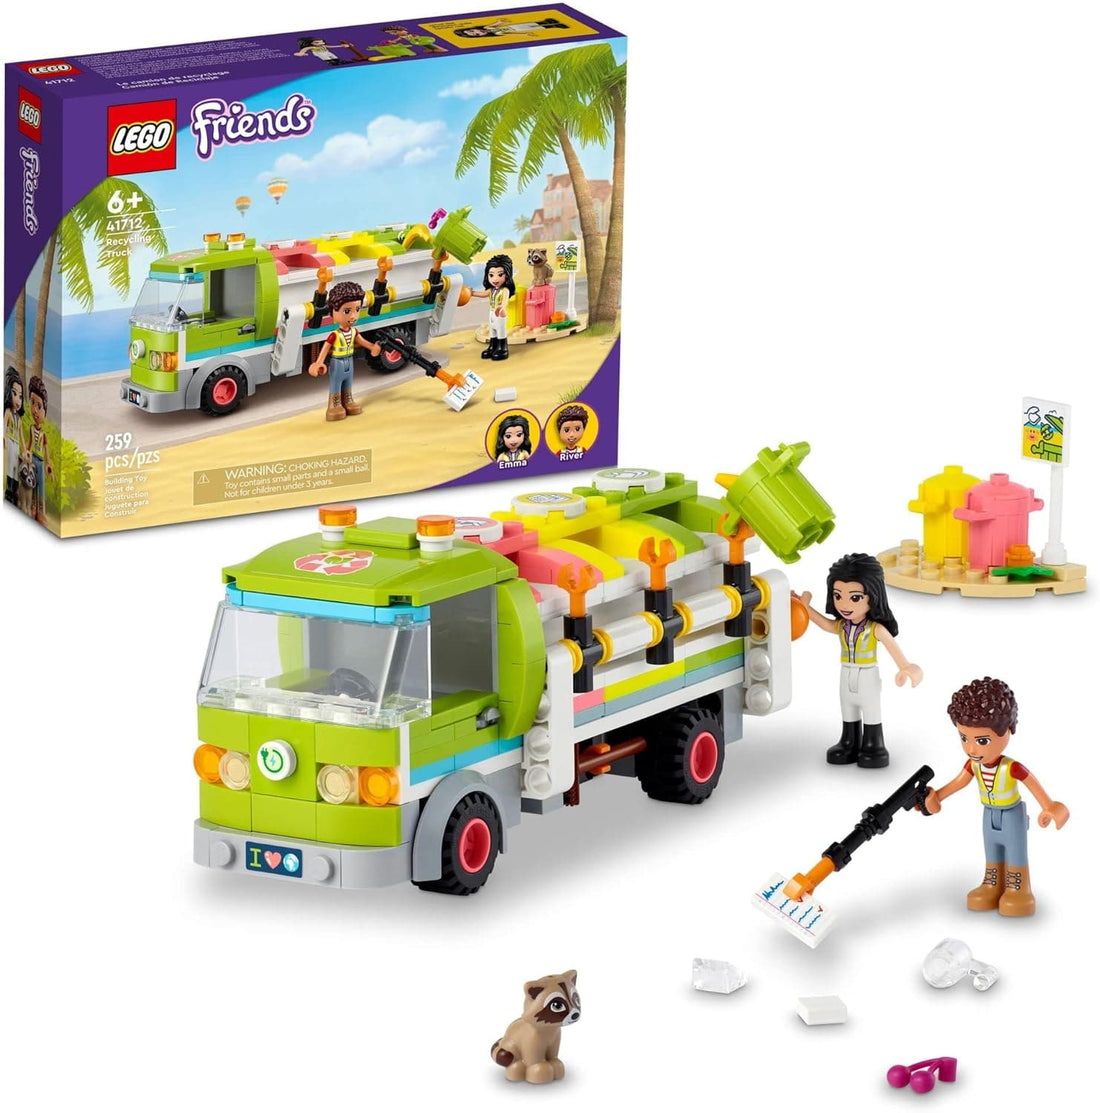 LEGO Friends Recycling Truck Set Includes Garbage Sorting Bins, Emma and River Mini Dolls - best price from Maltashopper.com 41712